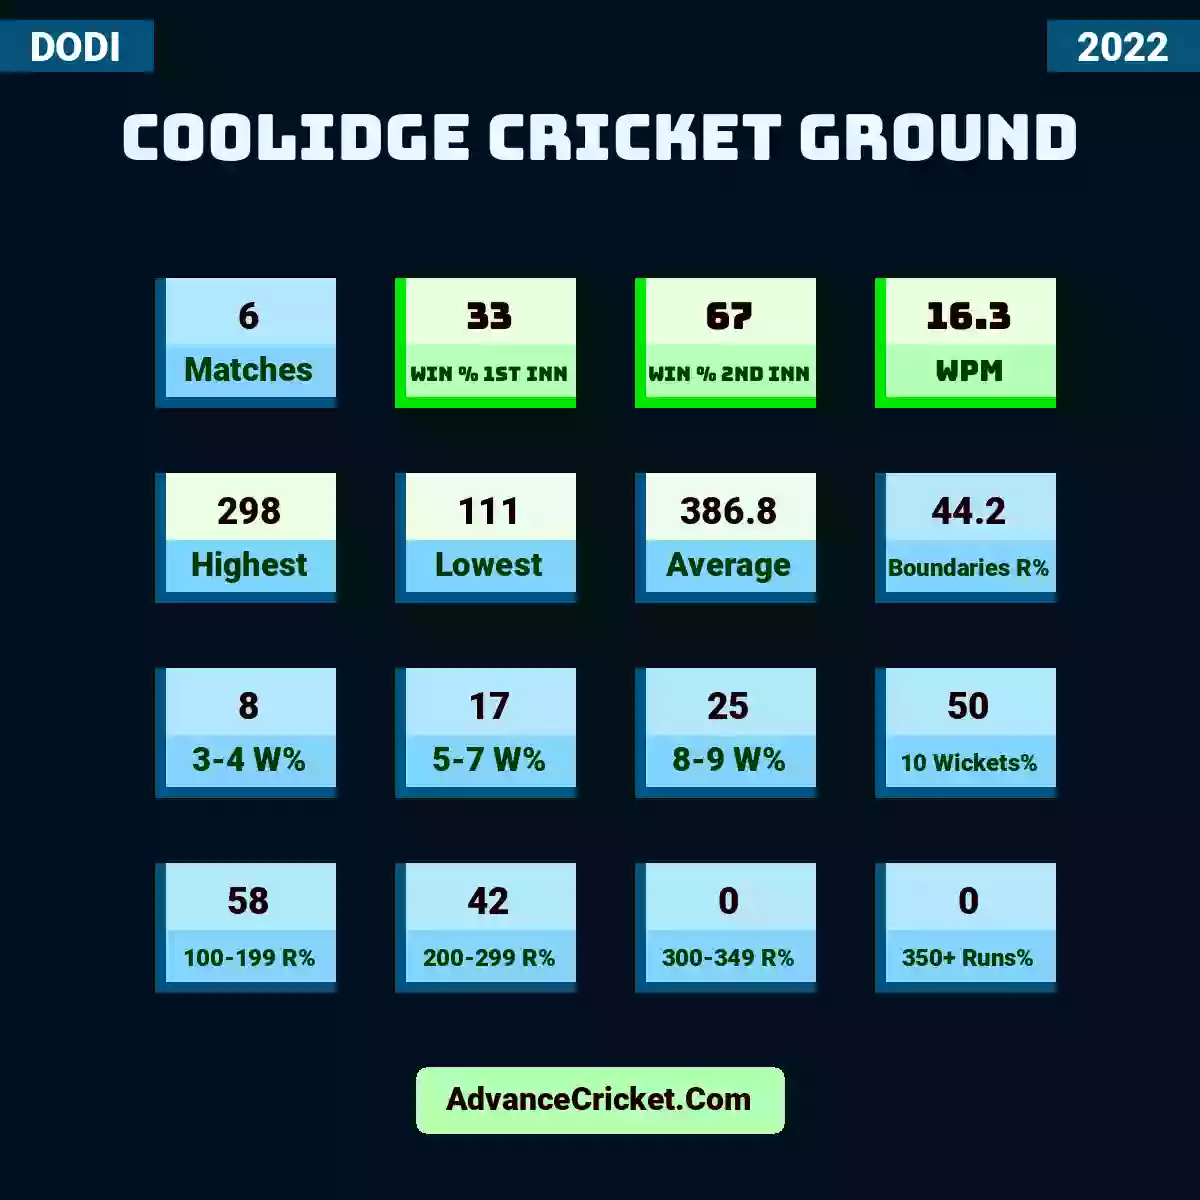 Image showing Coolidge Cricket Ground with Matches: 6, Win % 1st Inn: 33, Win % 2nd Inn: 67, WPM: 16.3, Highest: 298, Lowest: 111, Average: 386.8, Boundaries R%: 44.2, 3-4 W%: 8, 5-7 W%: 17, 8-9 W%: 25, 10 Wickets%: 50, 100-199 R%: 58, 200-299 R%: 42, 300-349 R%: 0, 350+ Runs%: 0.